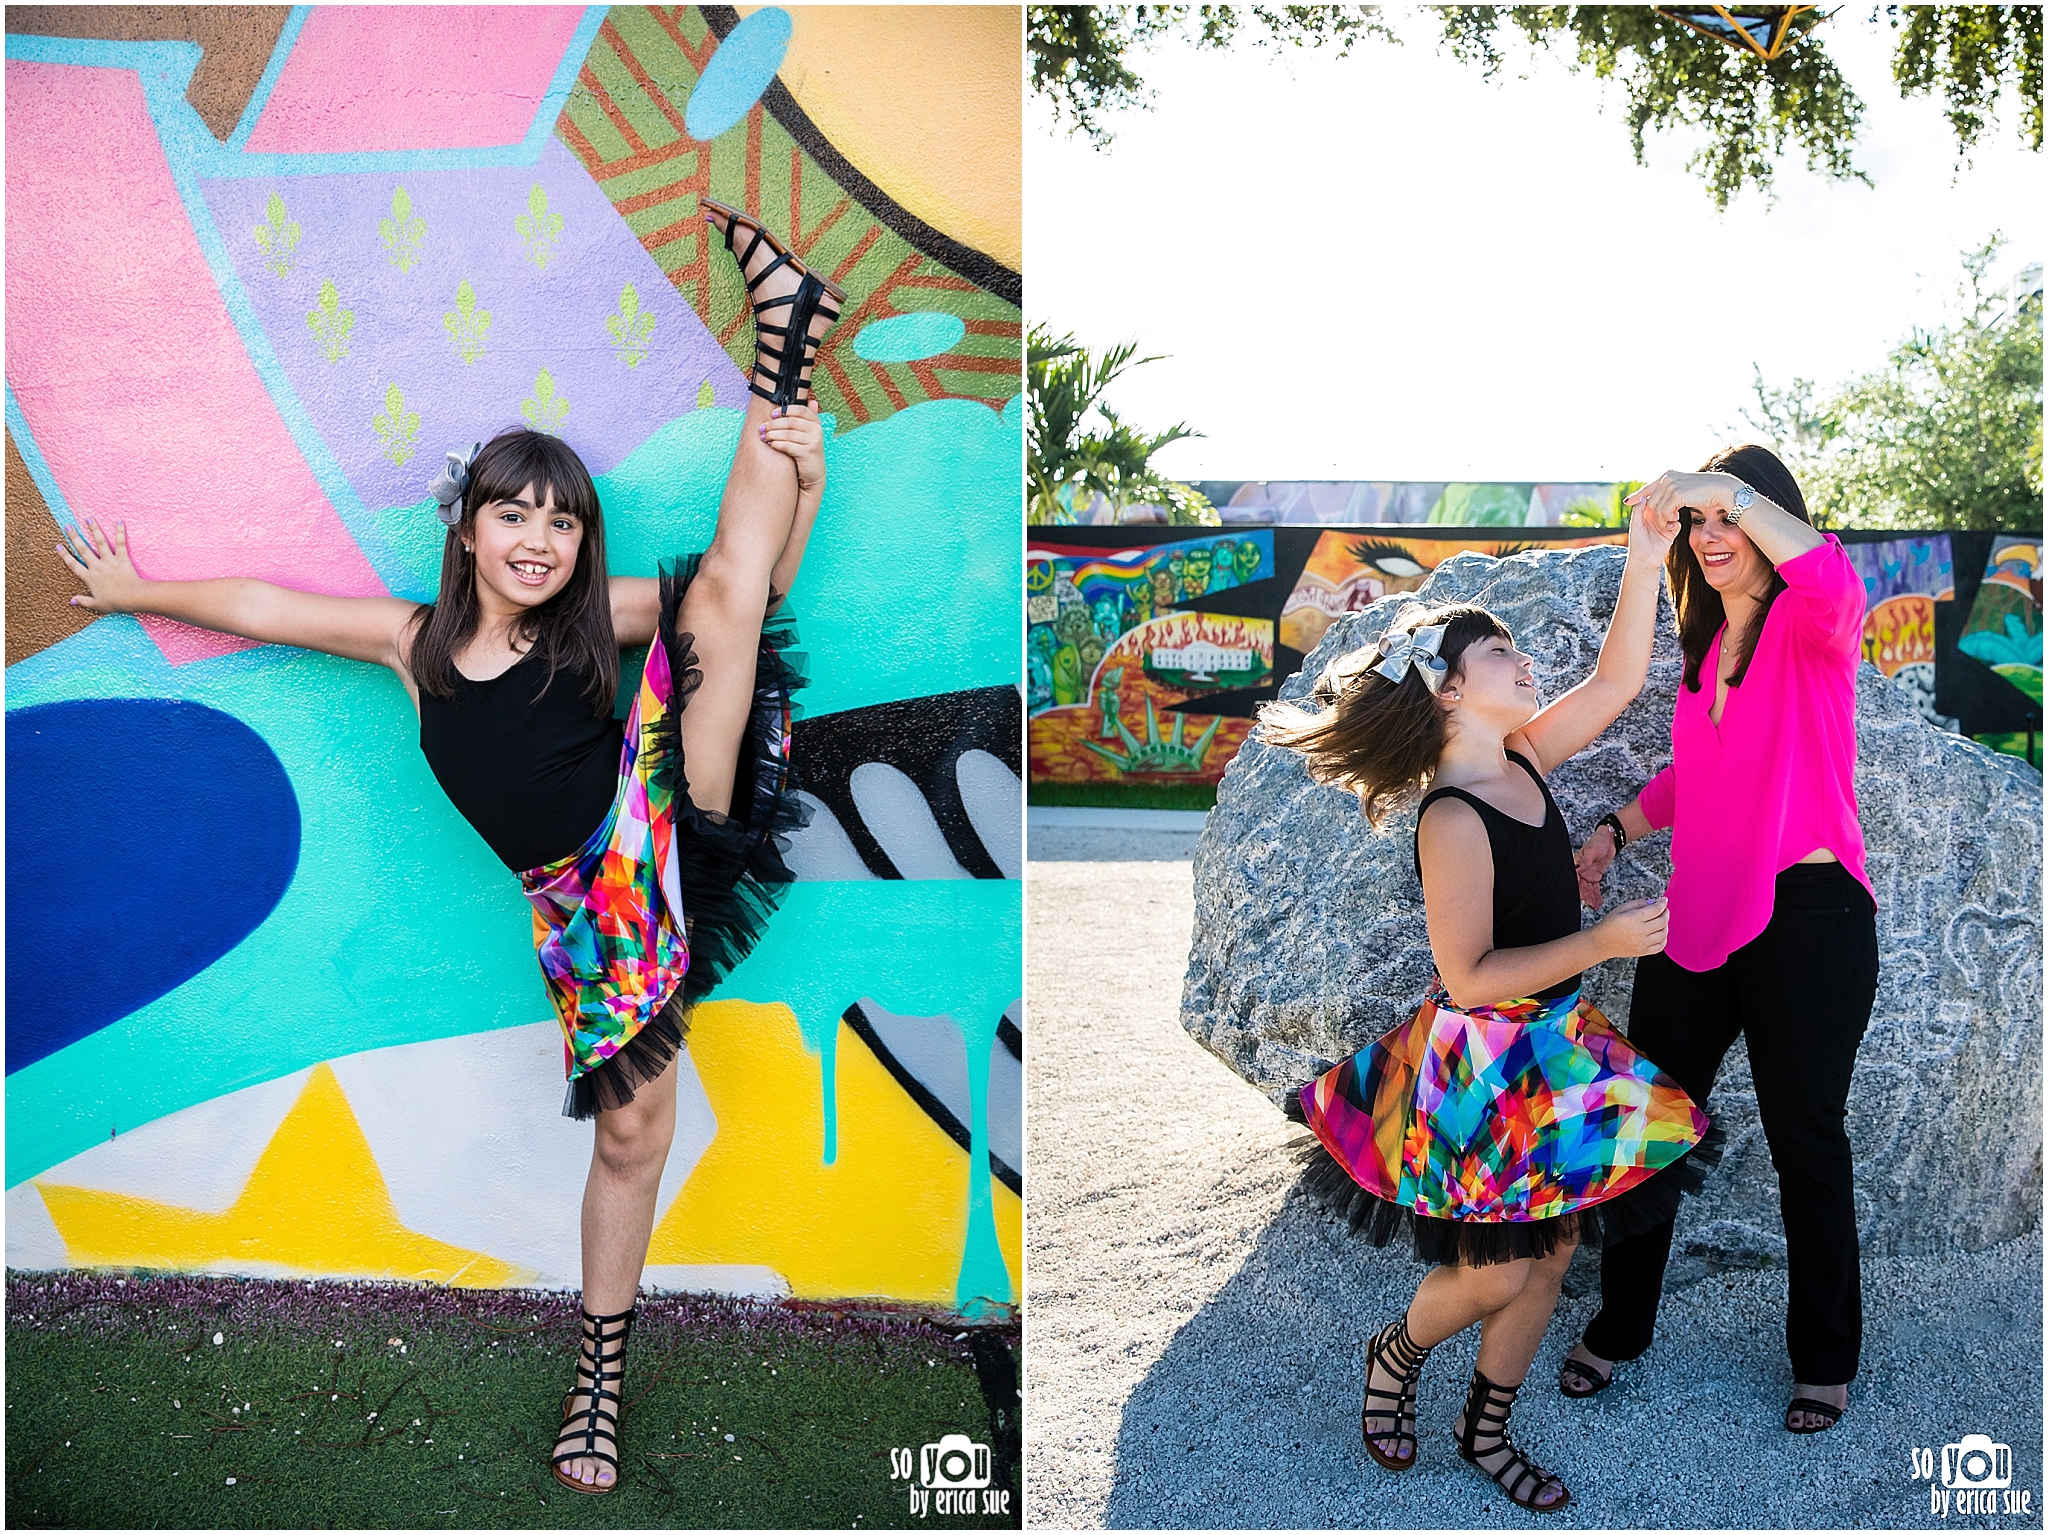 so-you-by-erica-sue-family-photographer-miami-fl-wynwood-mother-daughter-3266 (2).jpg